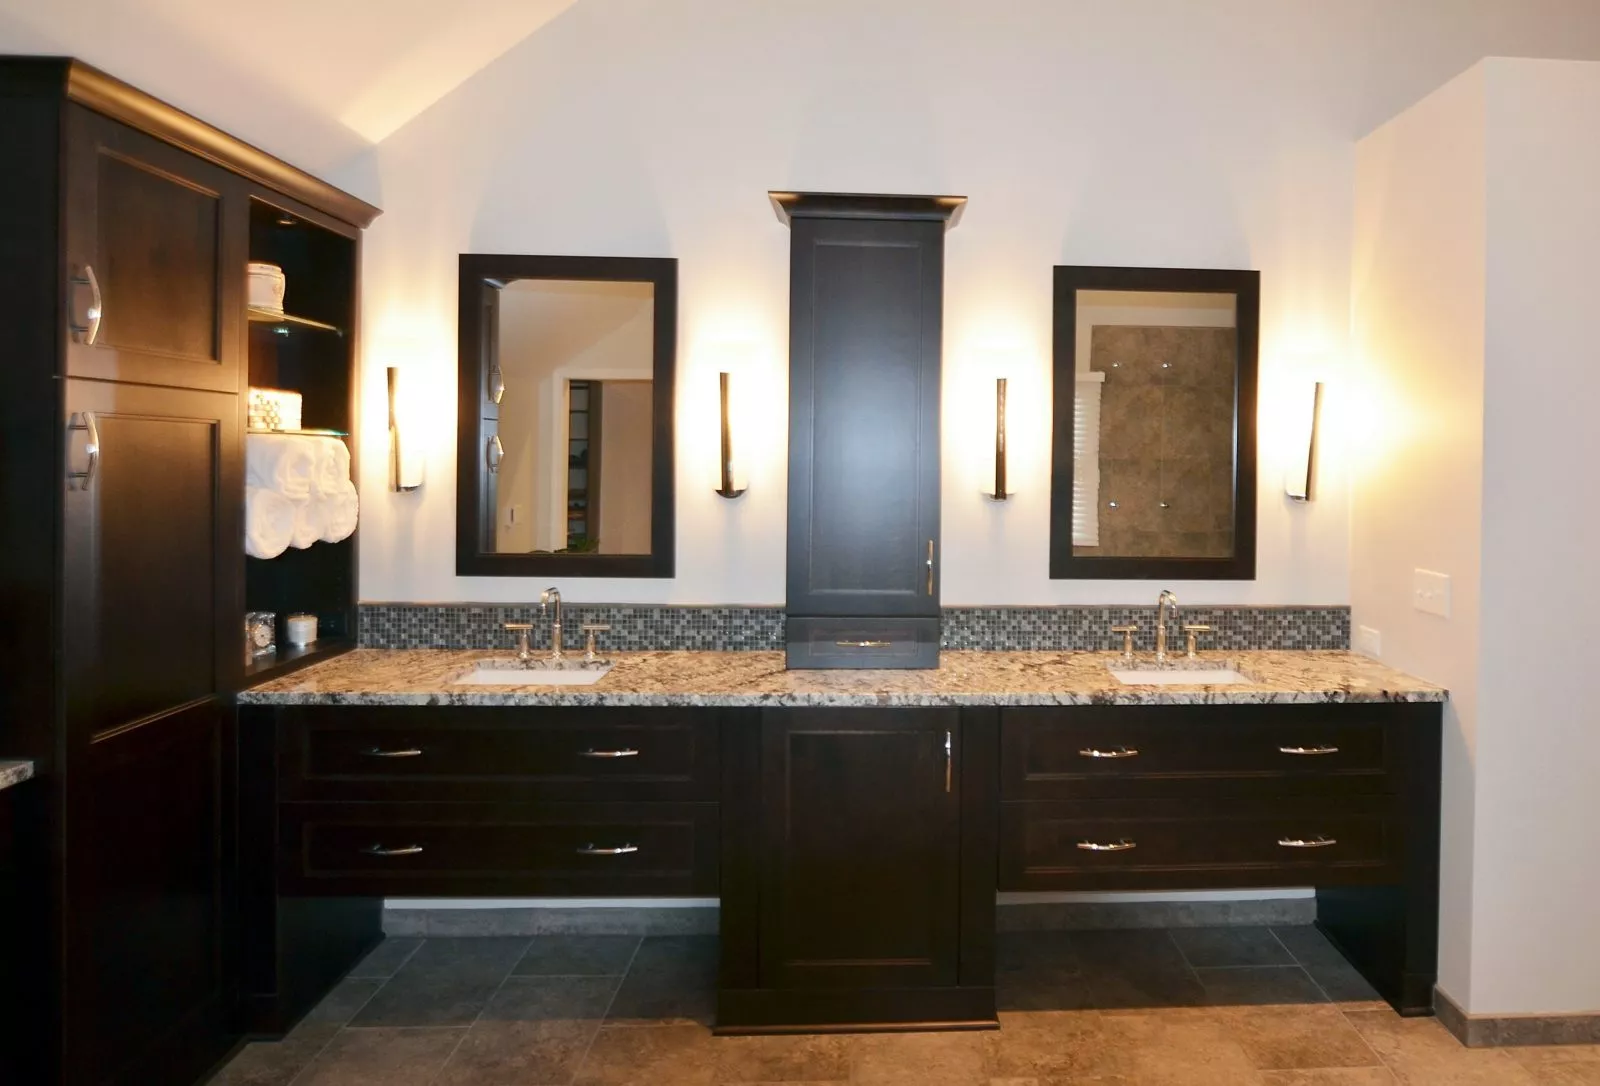 A suspended vanity adds modern flair to a kitchen while drawers for plumbing improve accessibility.